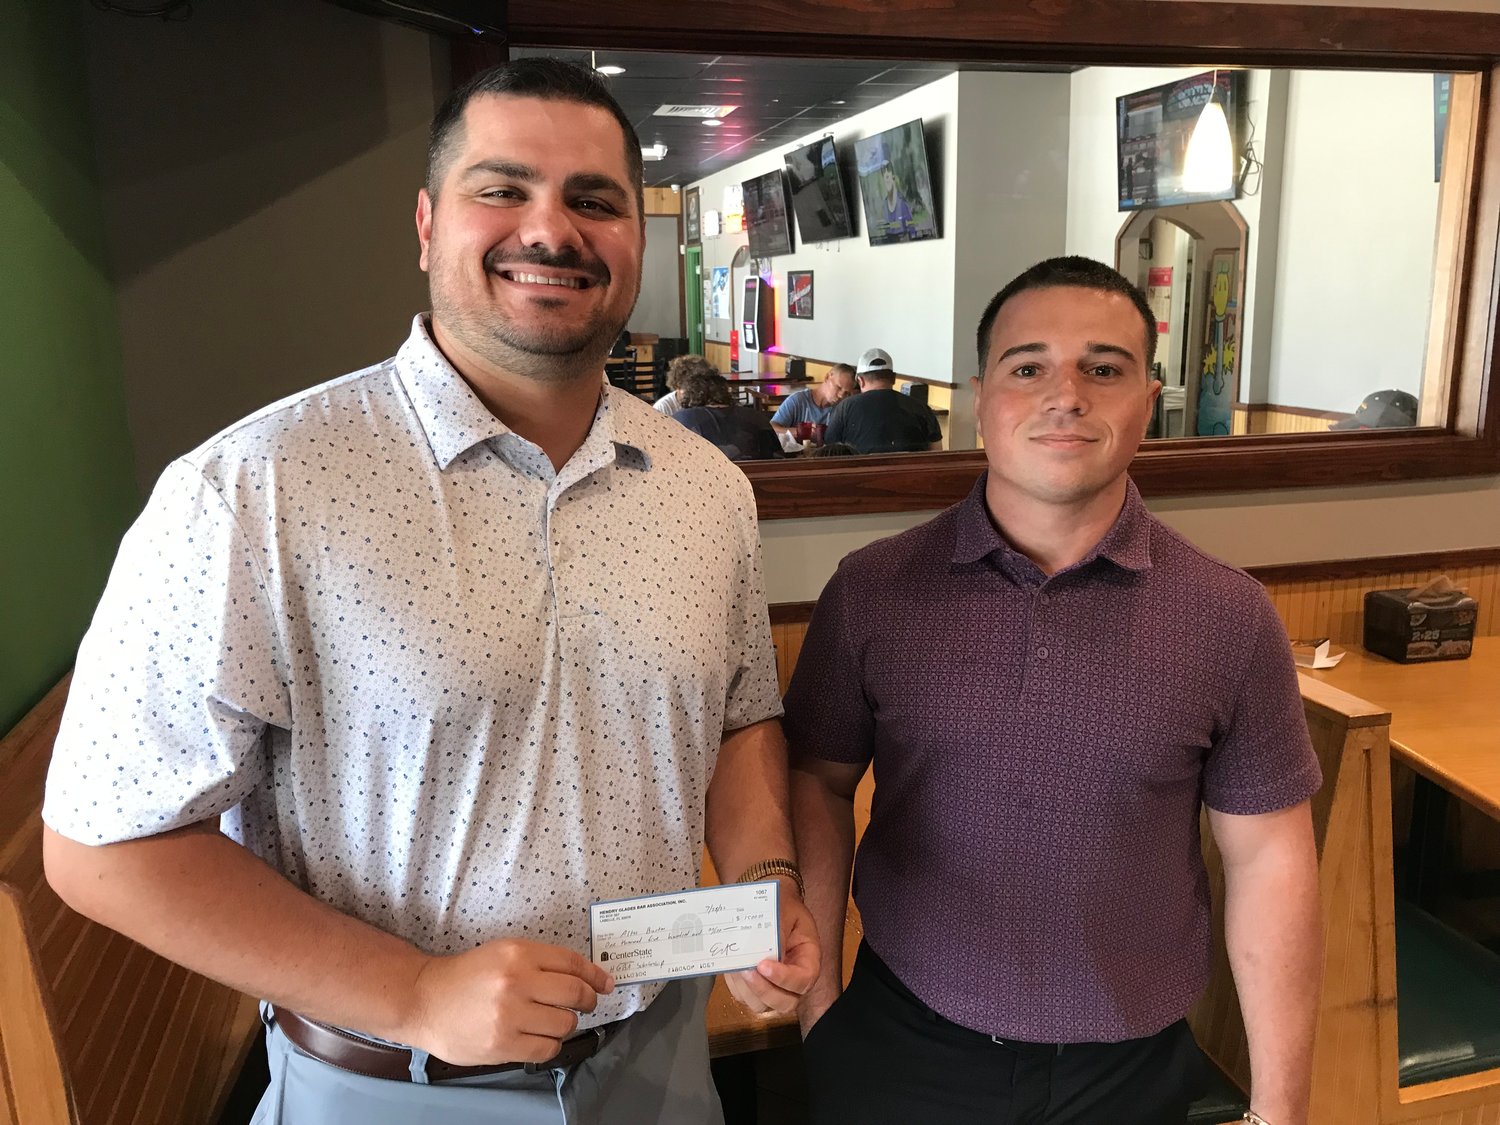 Alton Burton (left) and Scott Morrison (right) each received a $1,500 scholarship on July 28, from The Hendry-Glades Bar Association.